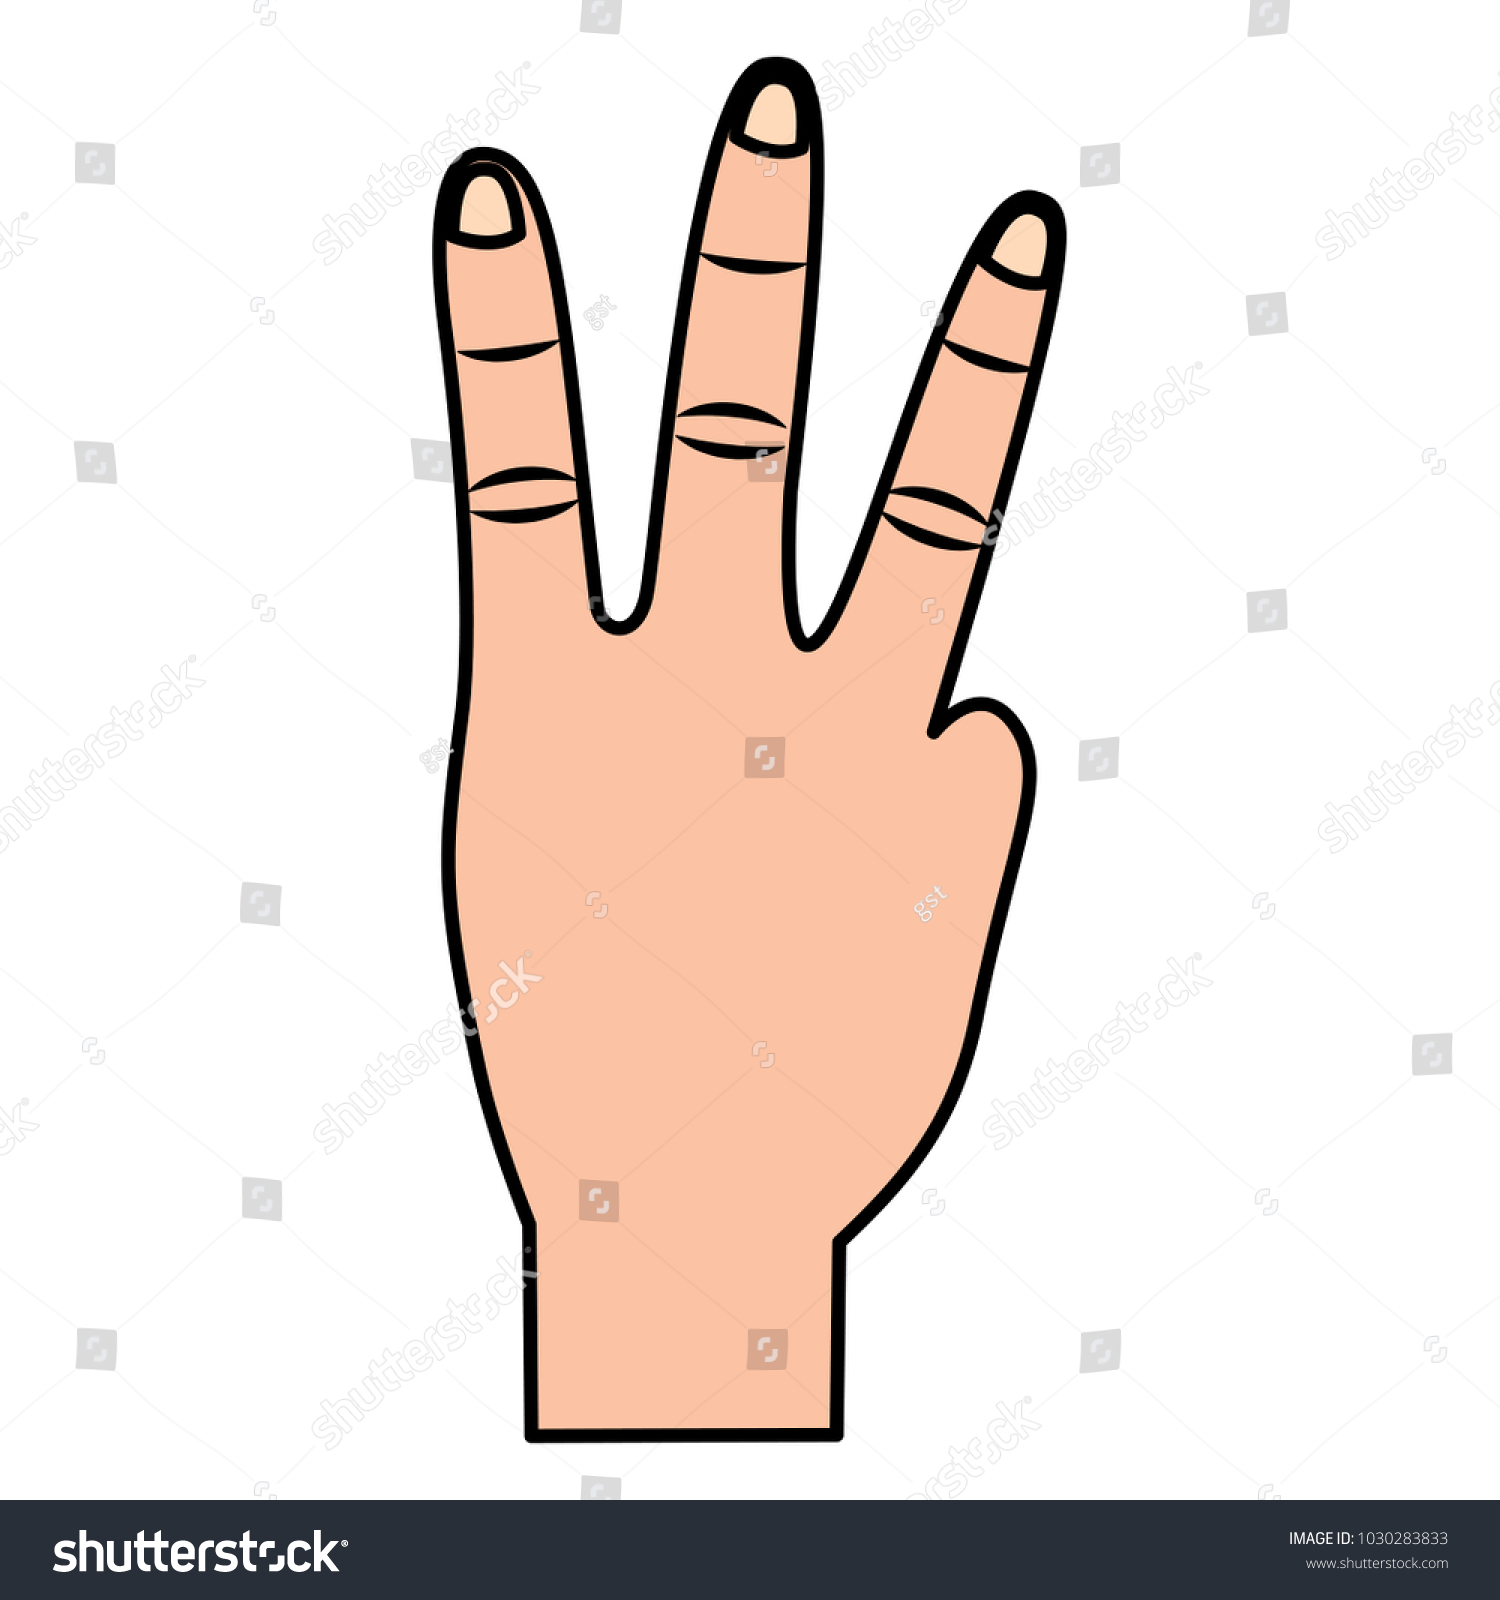 Hand Showing Three Fingers Gesture Royalty Free Stock Vector 1030283833